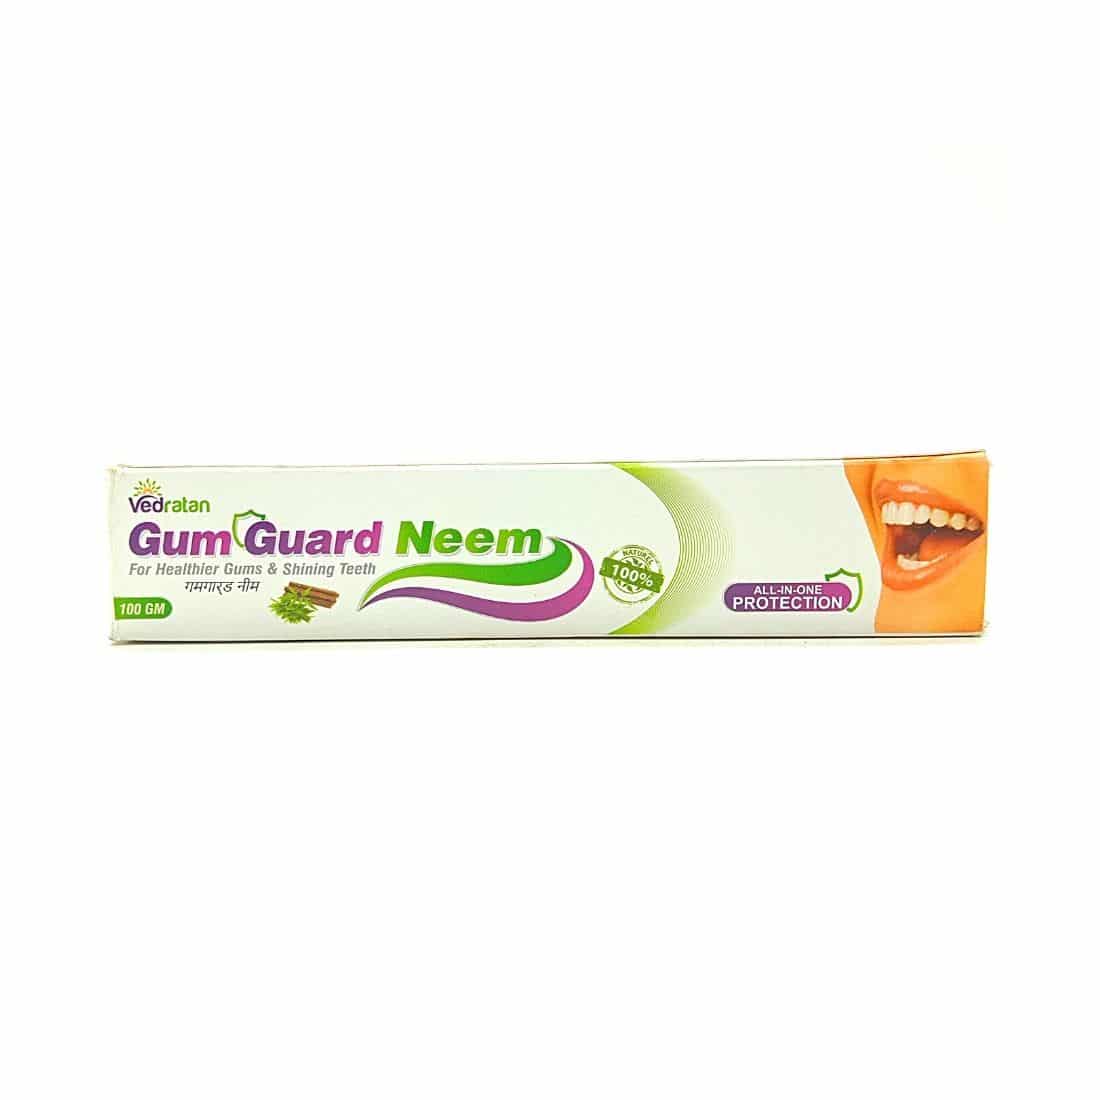 Ayurvedic Vedratan Gum Guard Neem Tooth Paste for healthy gums and bright teeth.